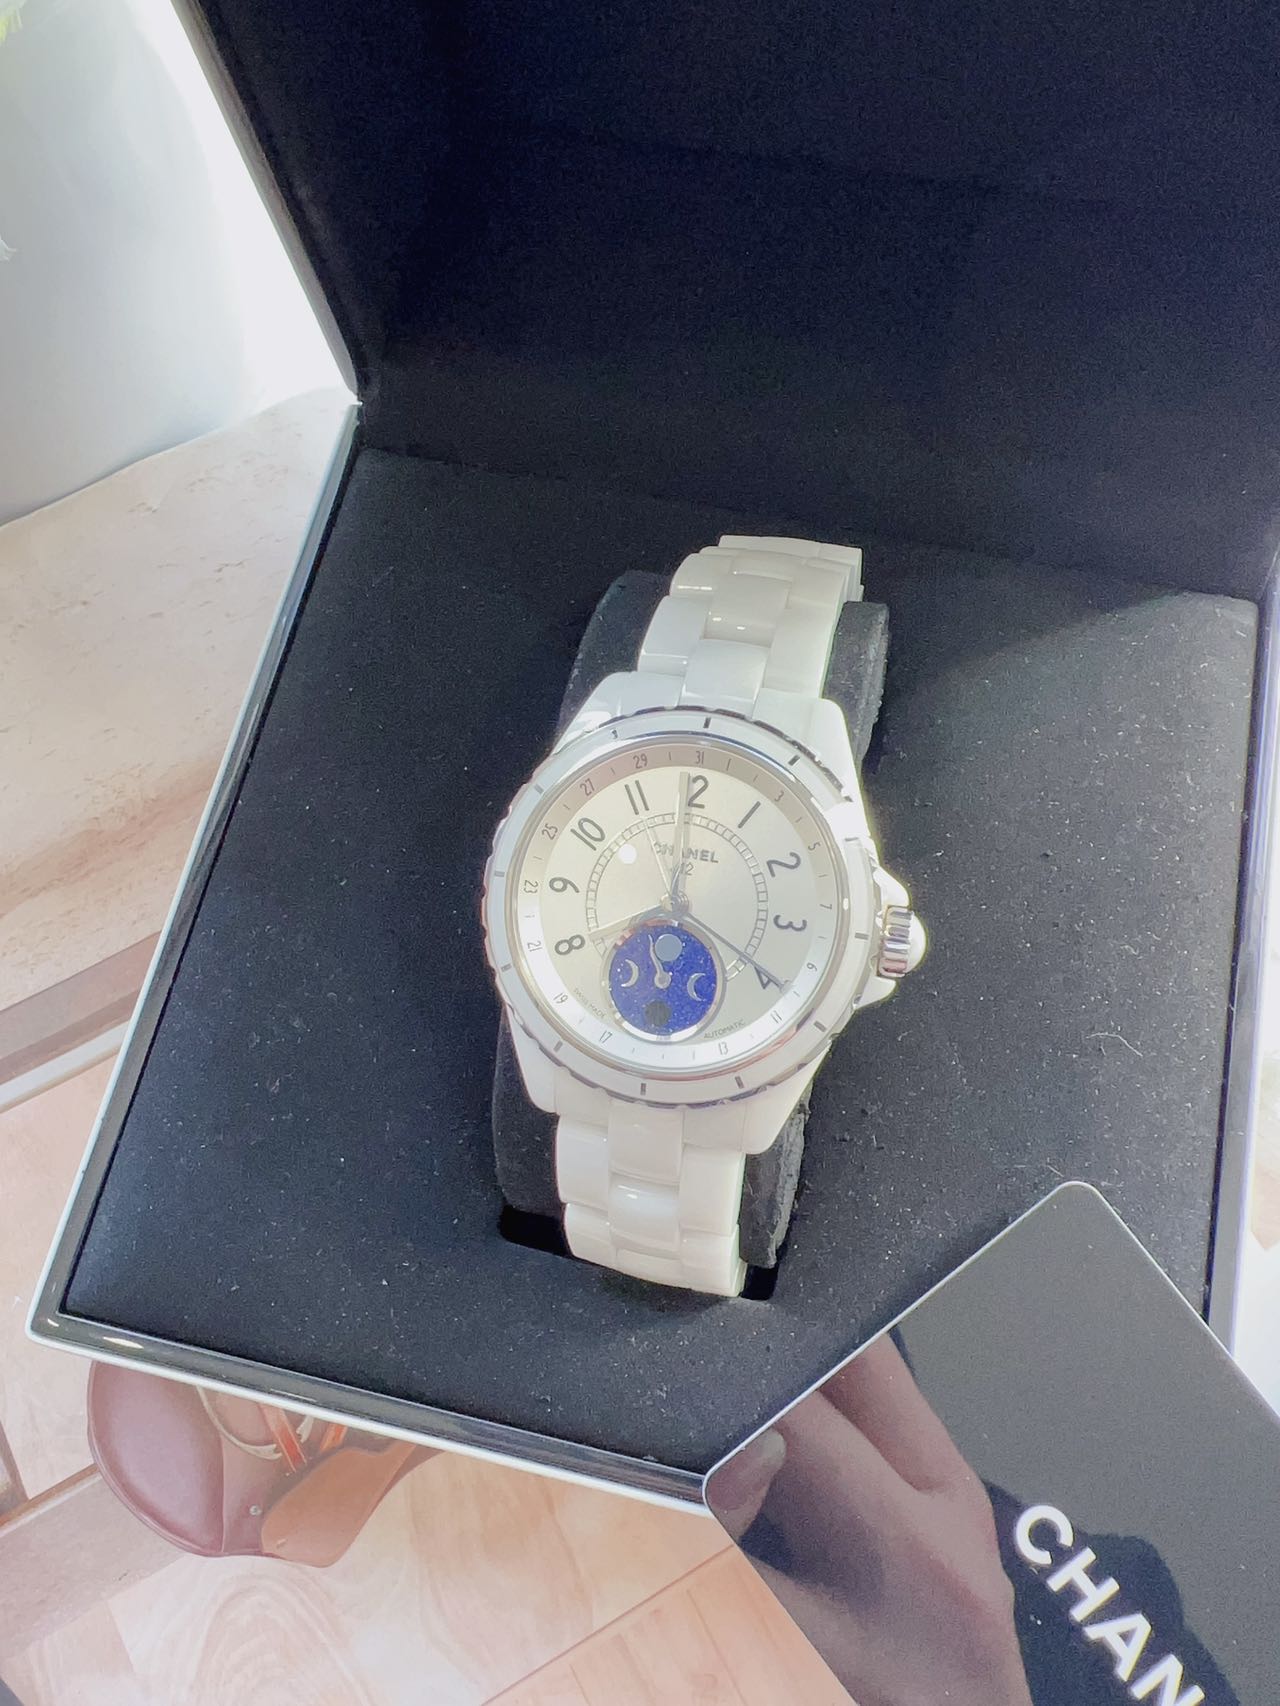 Chanel J12 Moon Phase Mother of Pearl Dial White Ceramic Ladies Watch 38mm